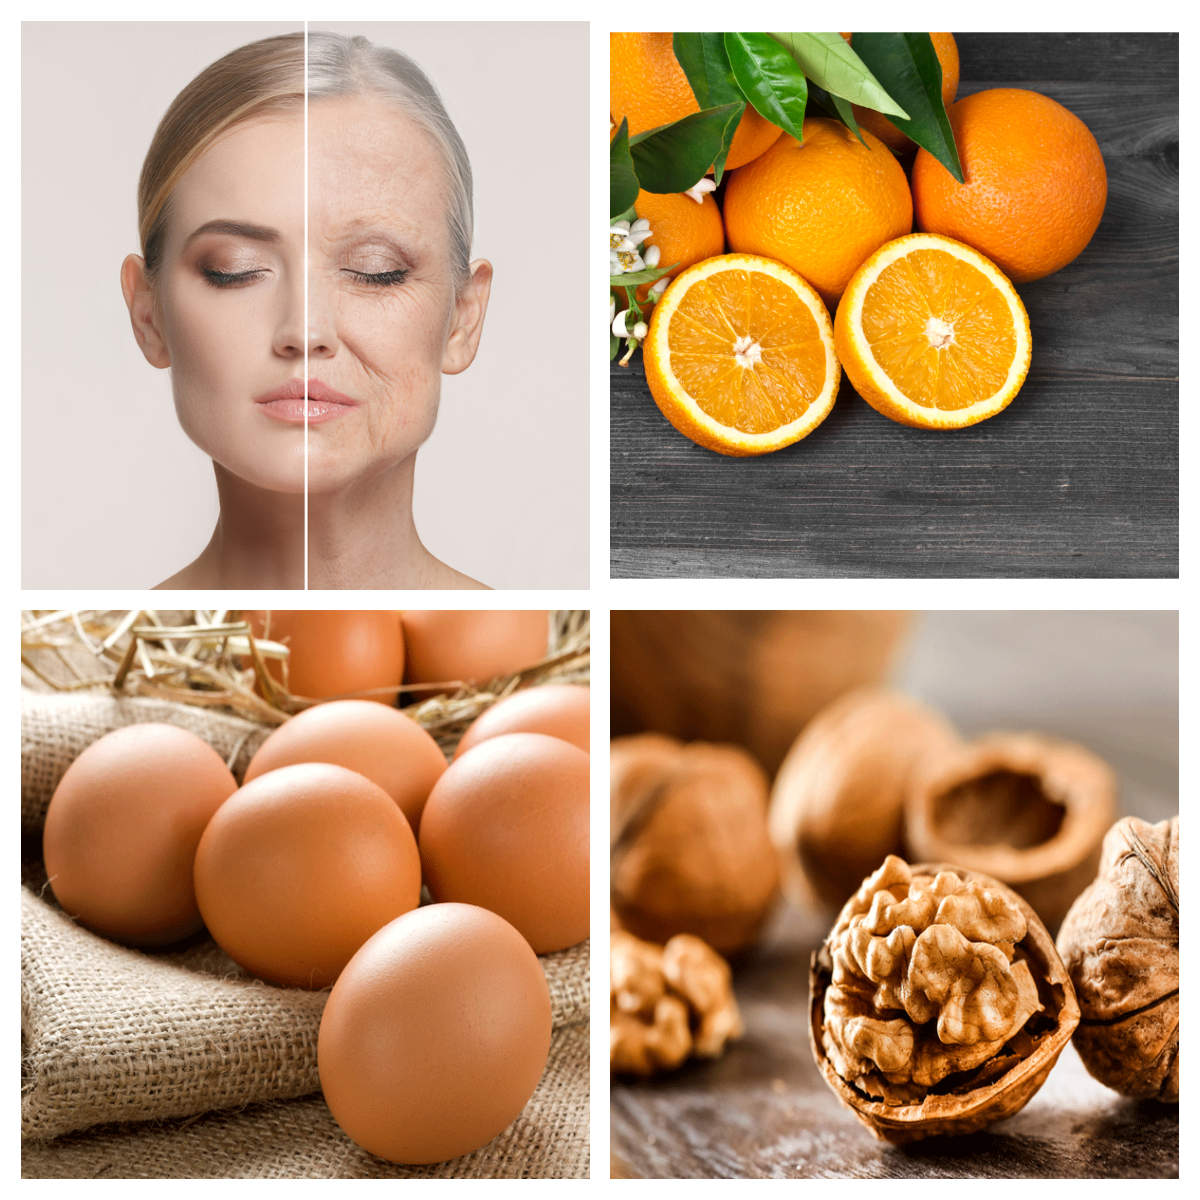 Foods that help skin look younger and healthier - Times of India